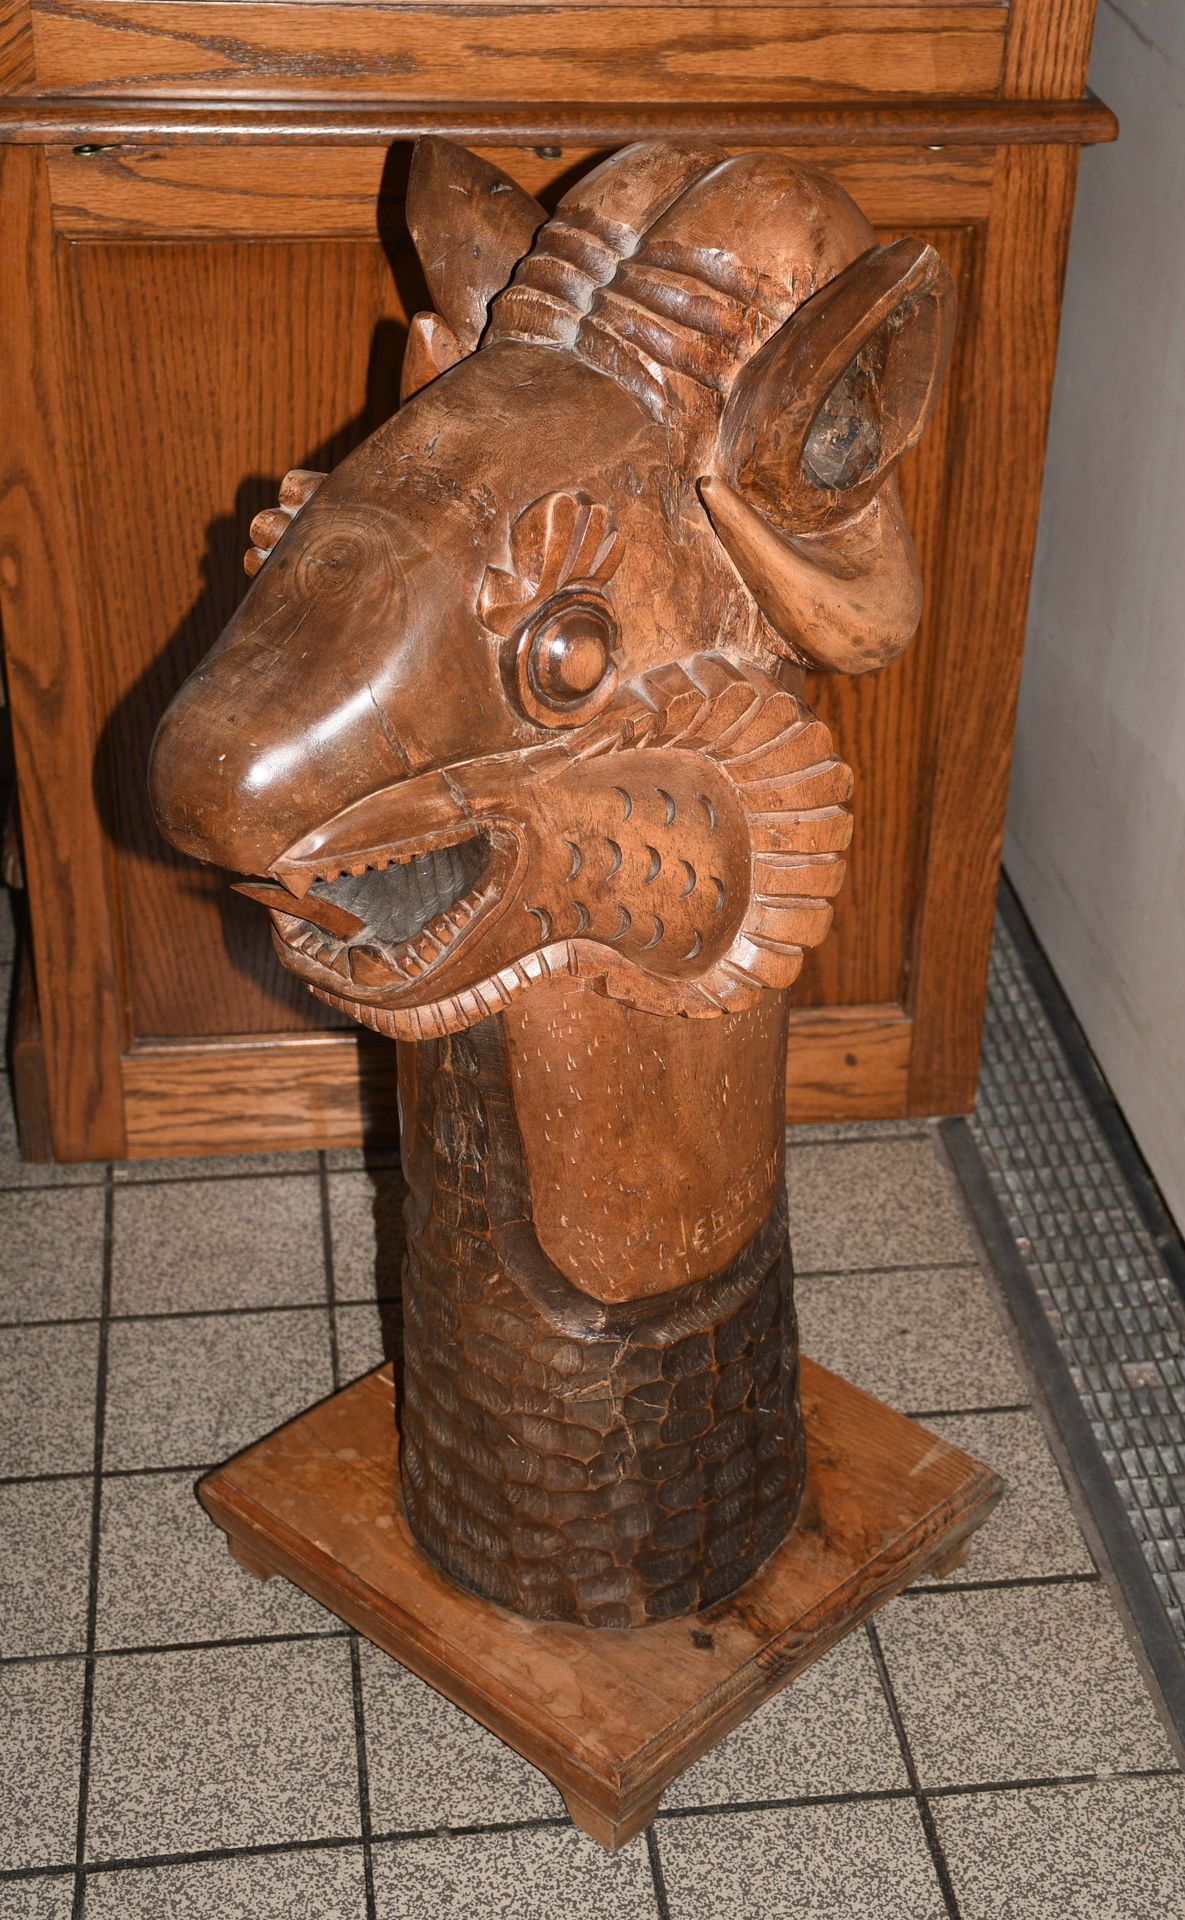 Null Ram's head / totem in carved wood

Height : 85 cm.